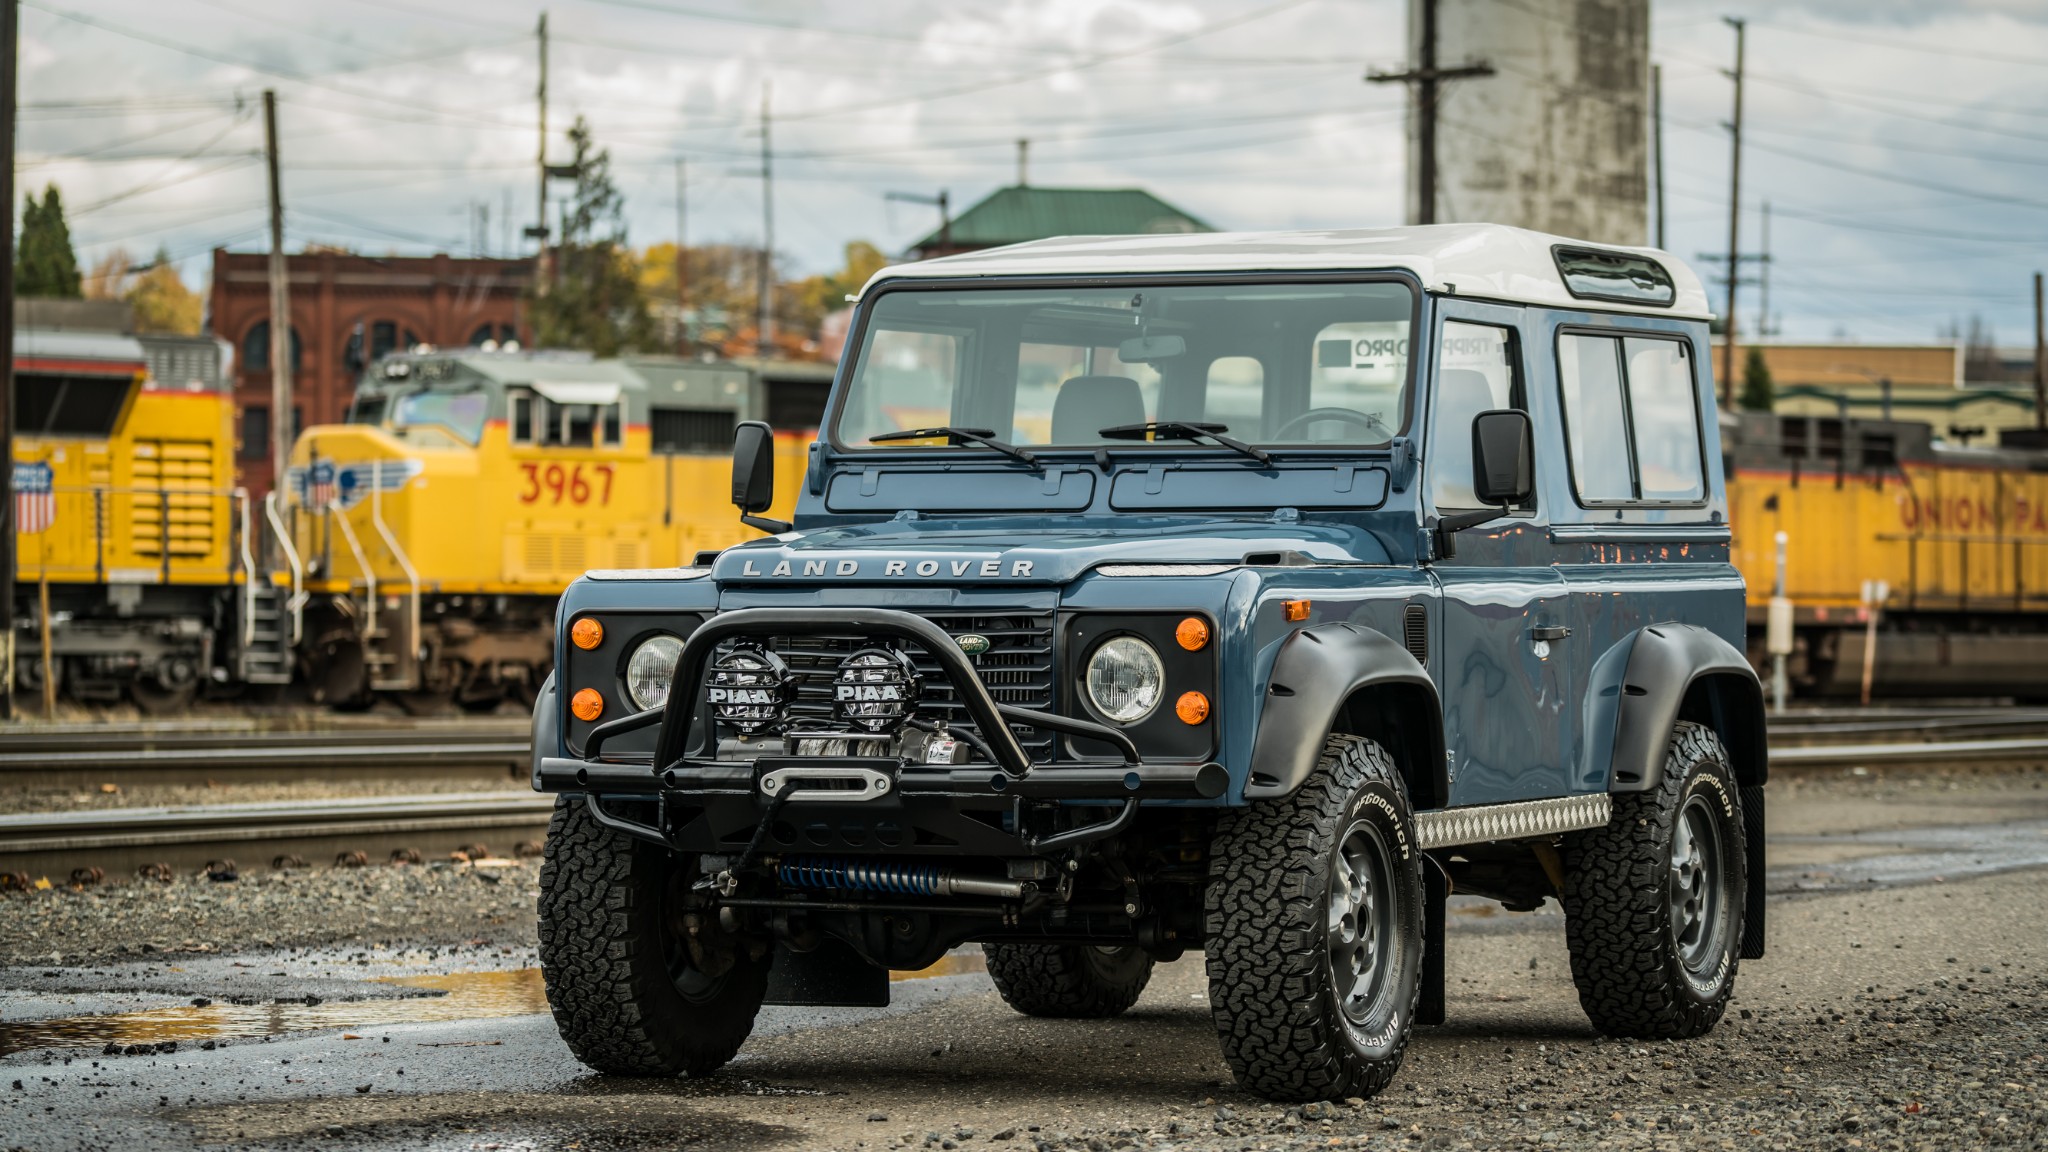 350+ Land Rover HD Wallpapers and Backgrounds